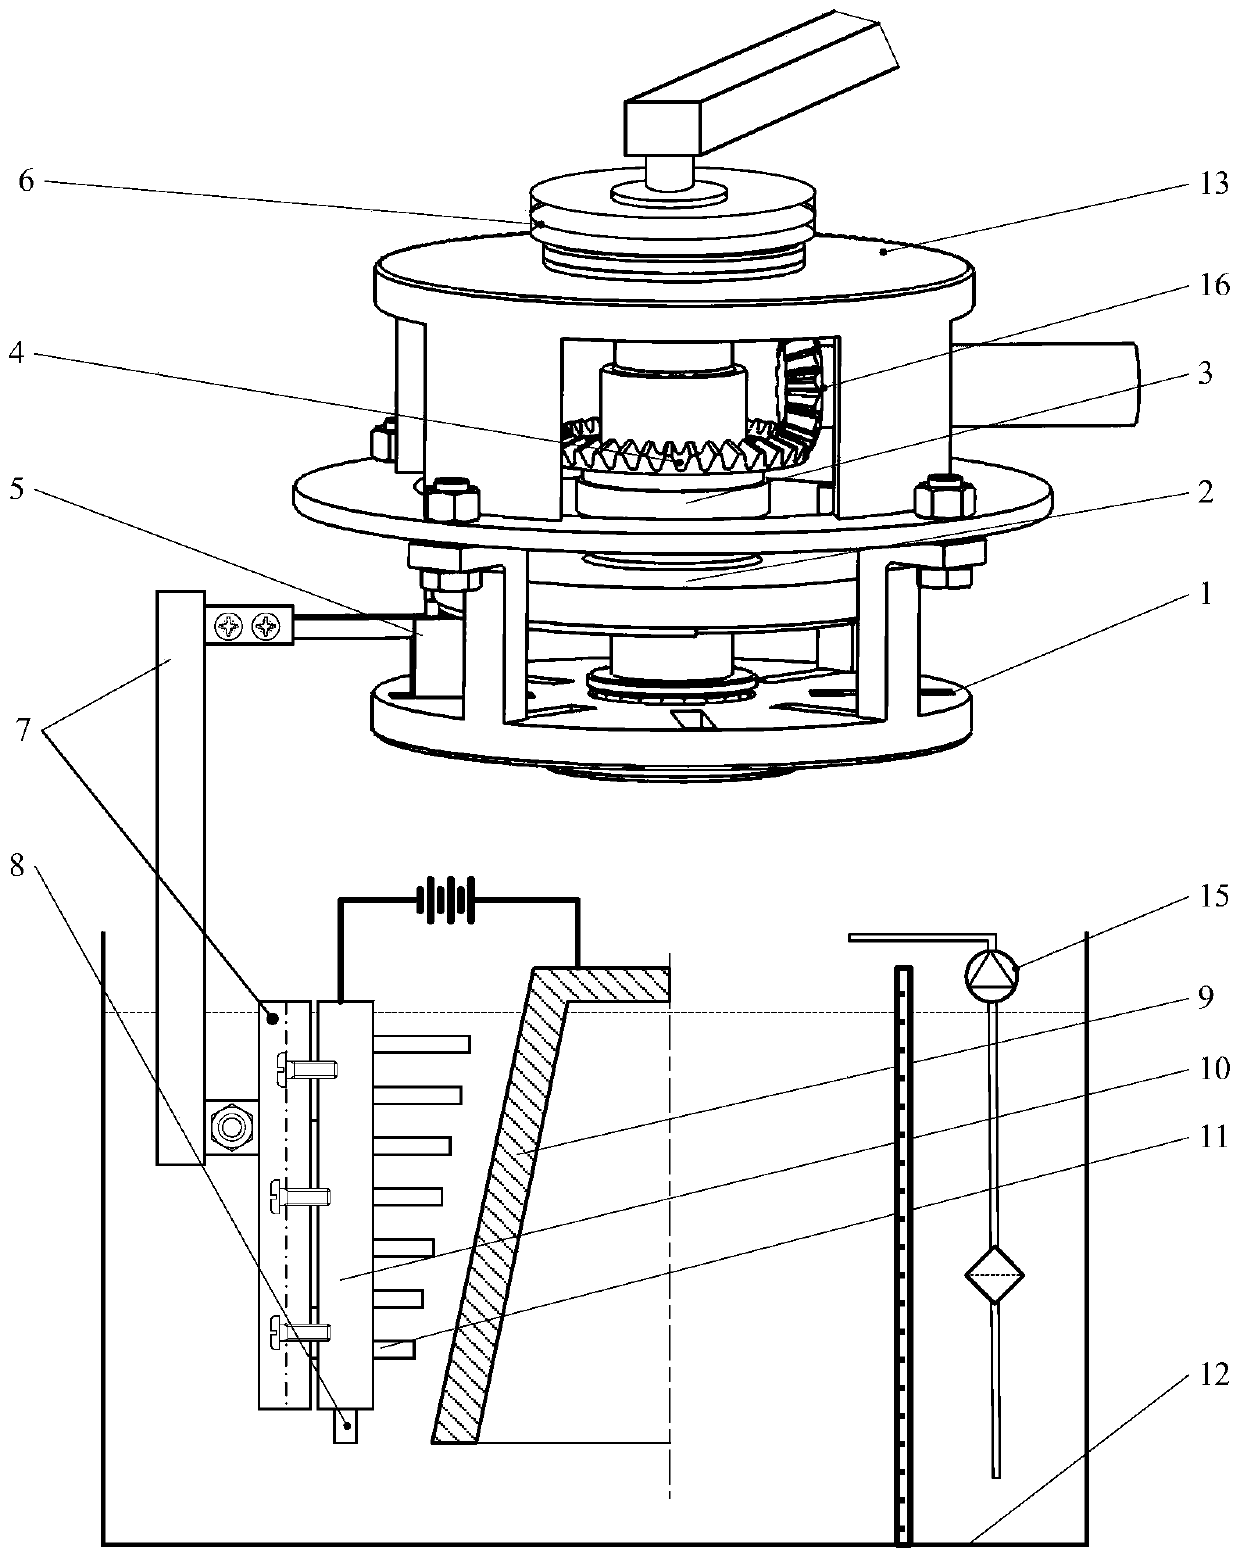 Special-shaped group hole electrolytic machining special machine distributed in circular array